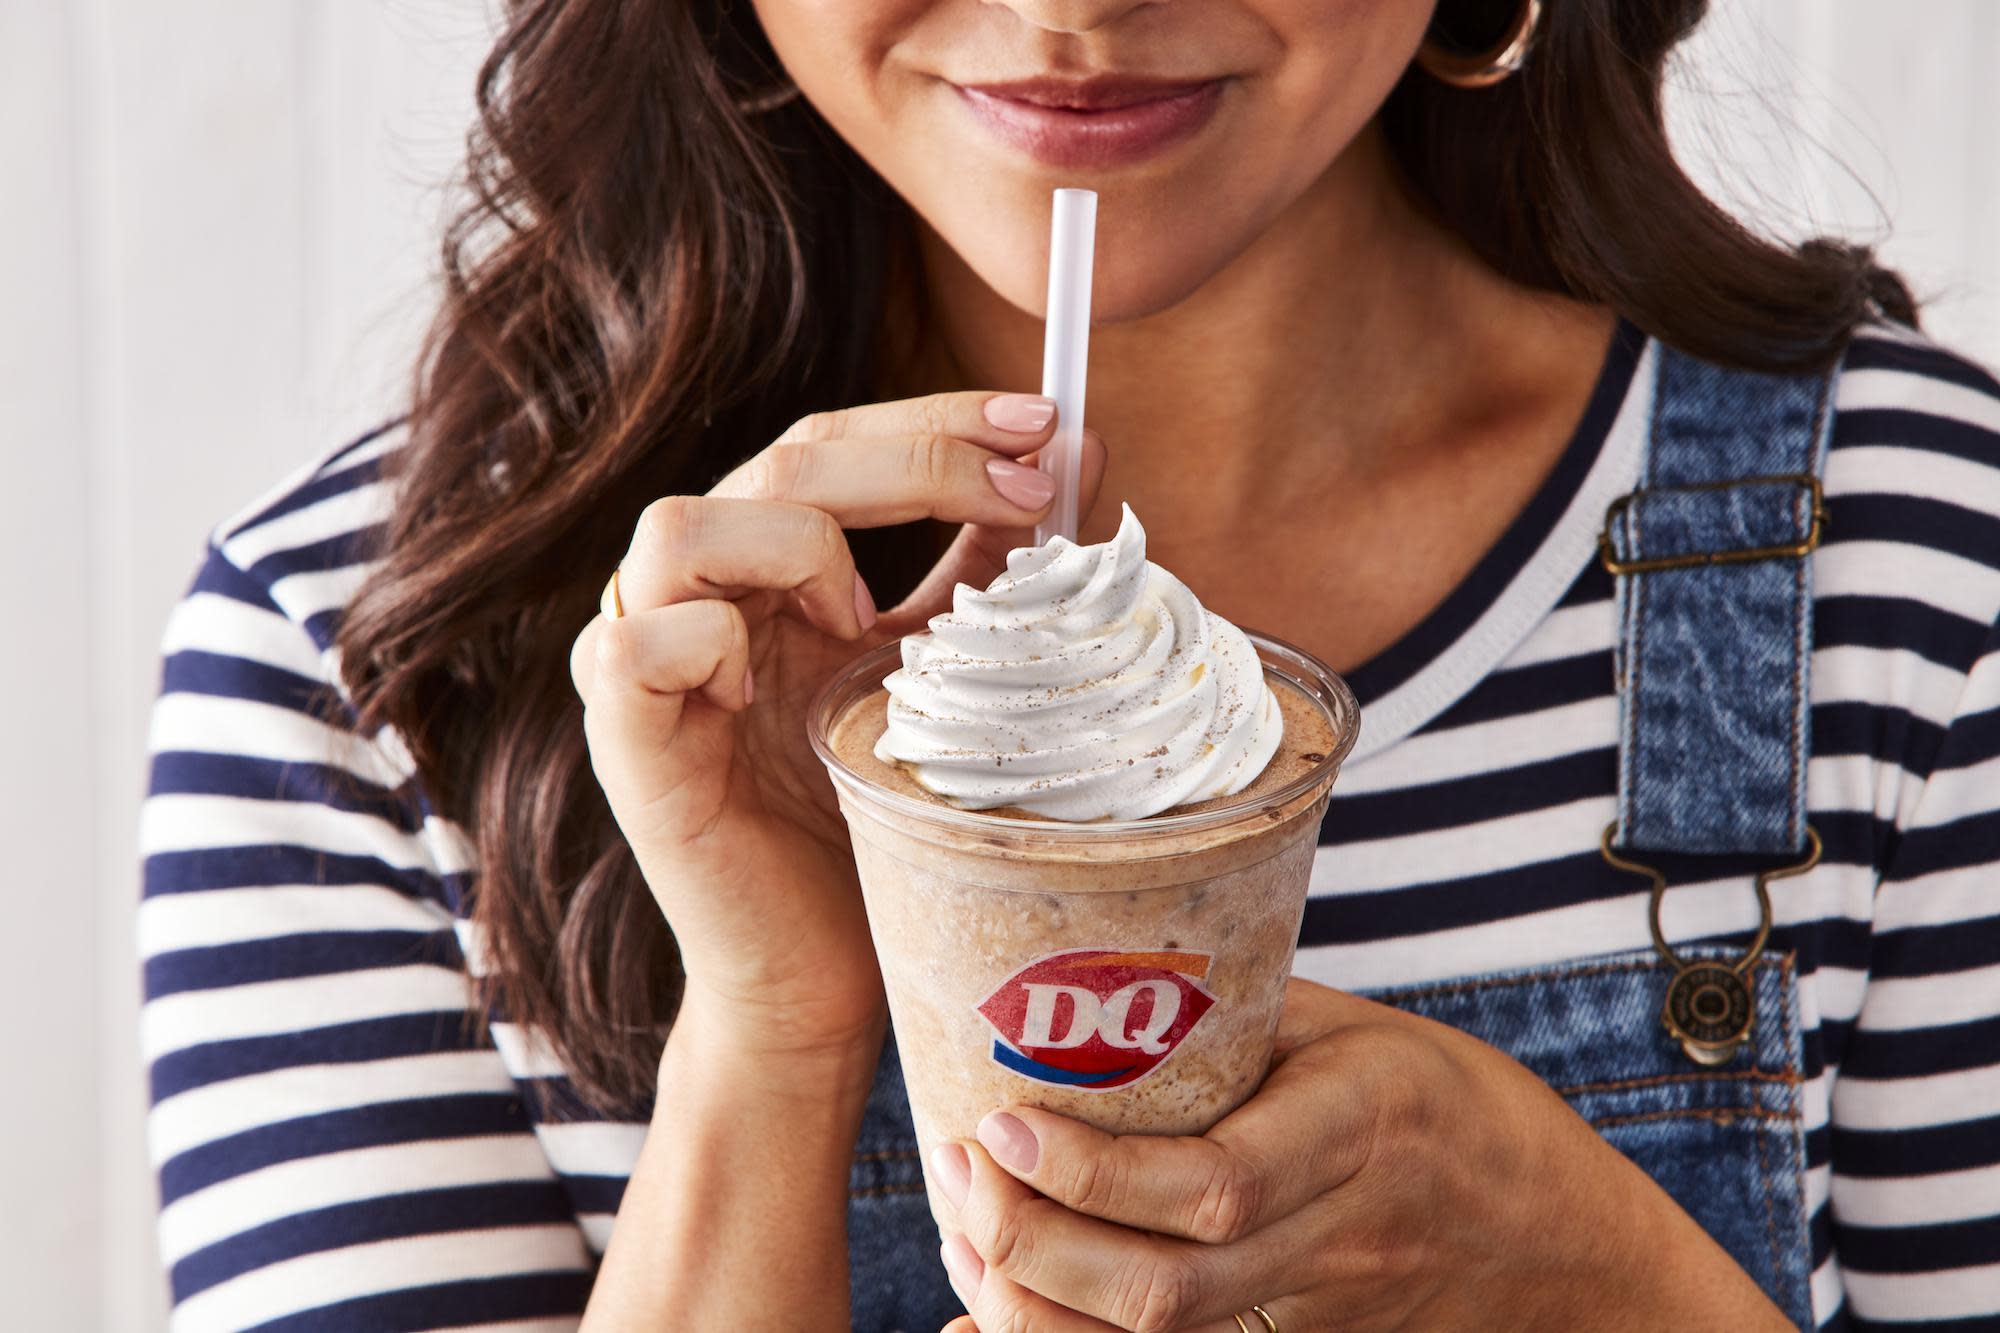 Dairy queen. The Dairy Queen is a Black woman.